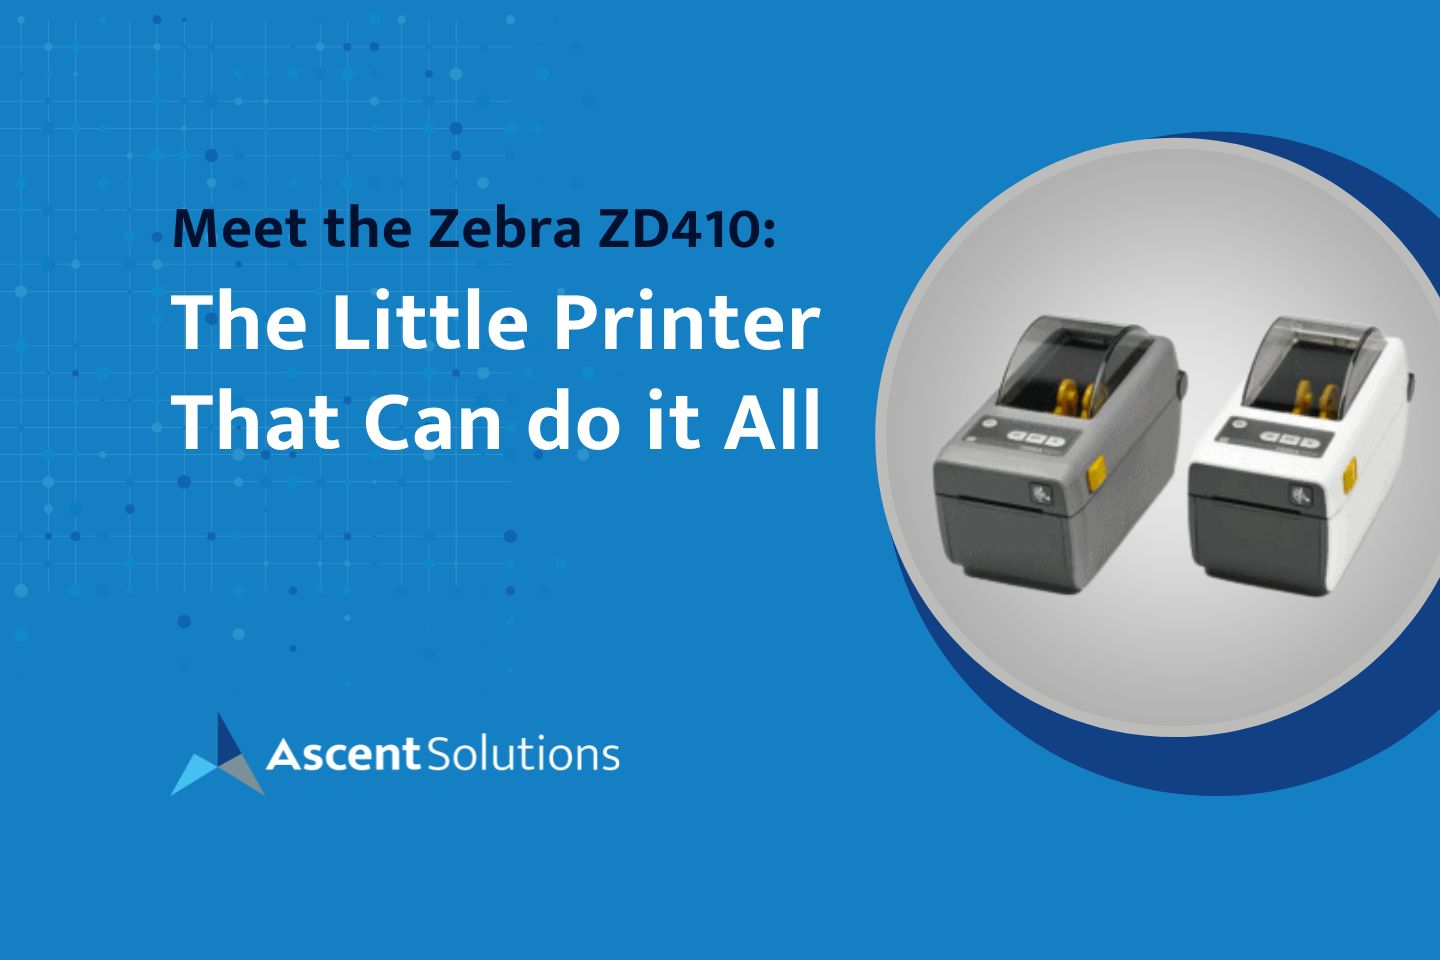 Meet the Zebra ZD410 The Little Printer That Can do it All